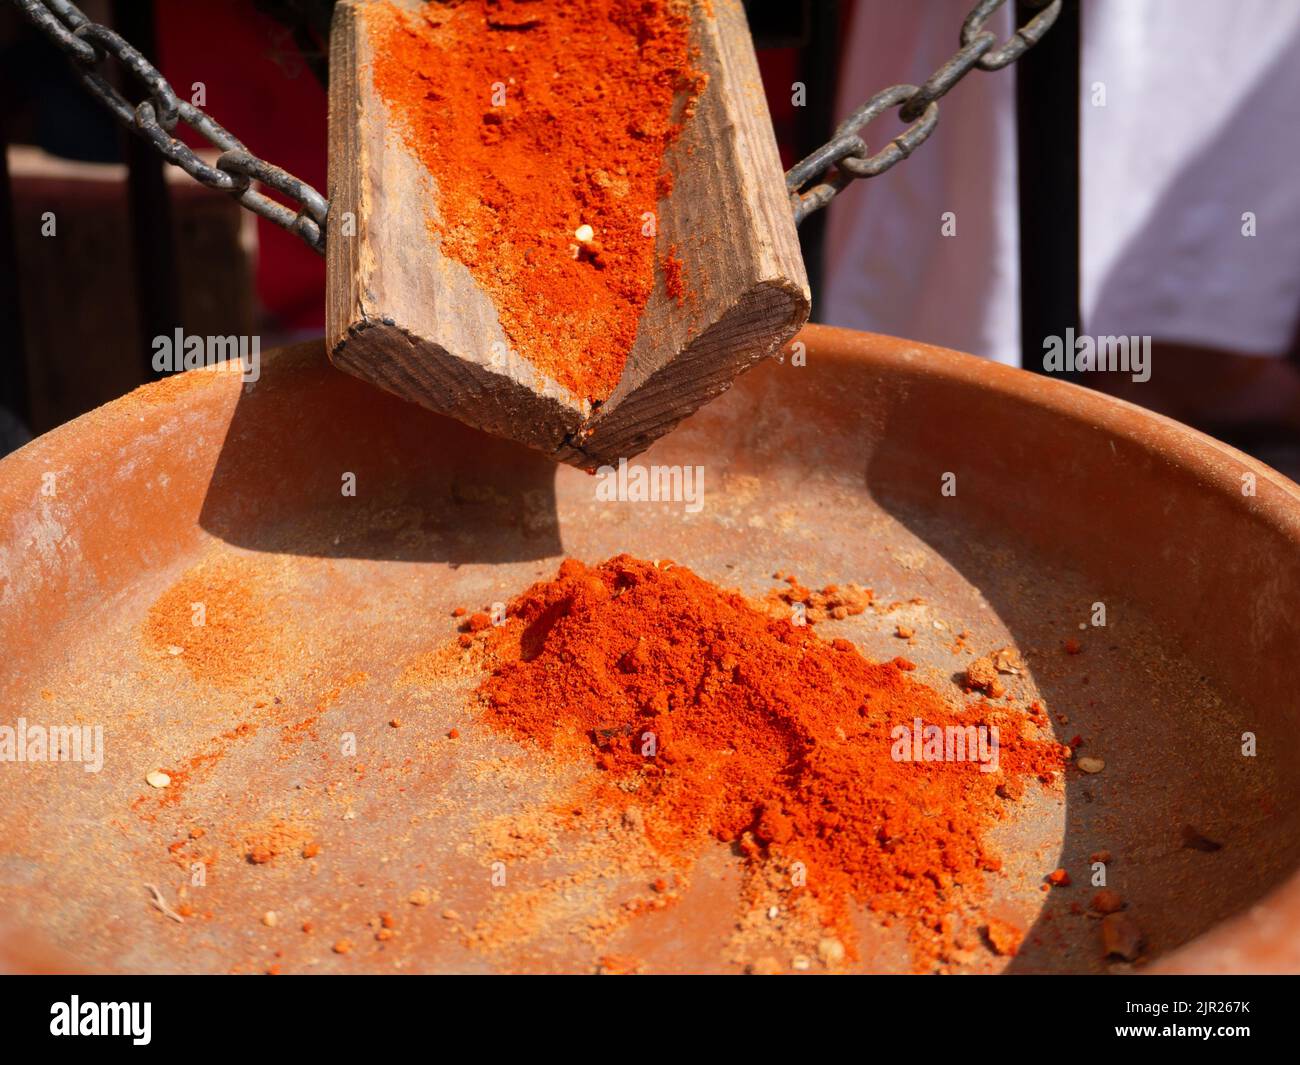 Paprika spice made from dried, smoked and ground red peppers in the ceramic bowl at the market counter Stock Photo